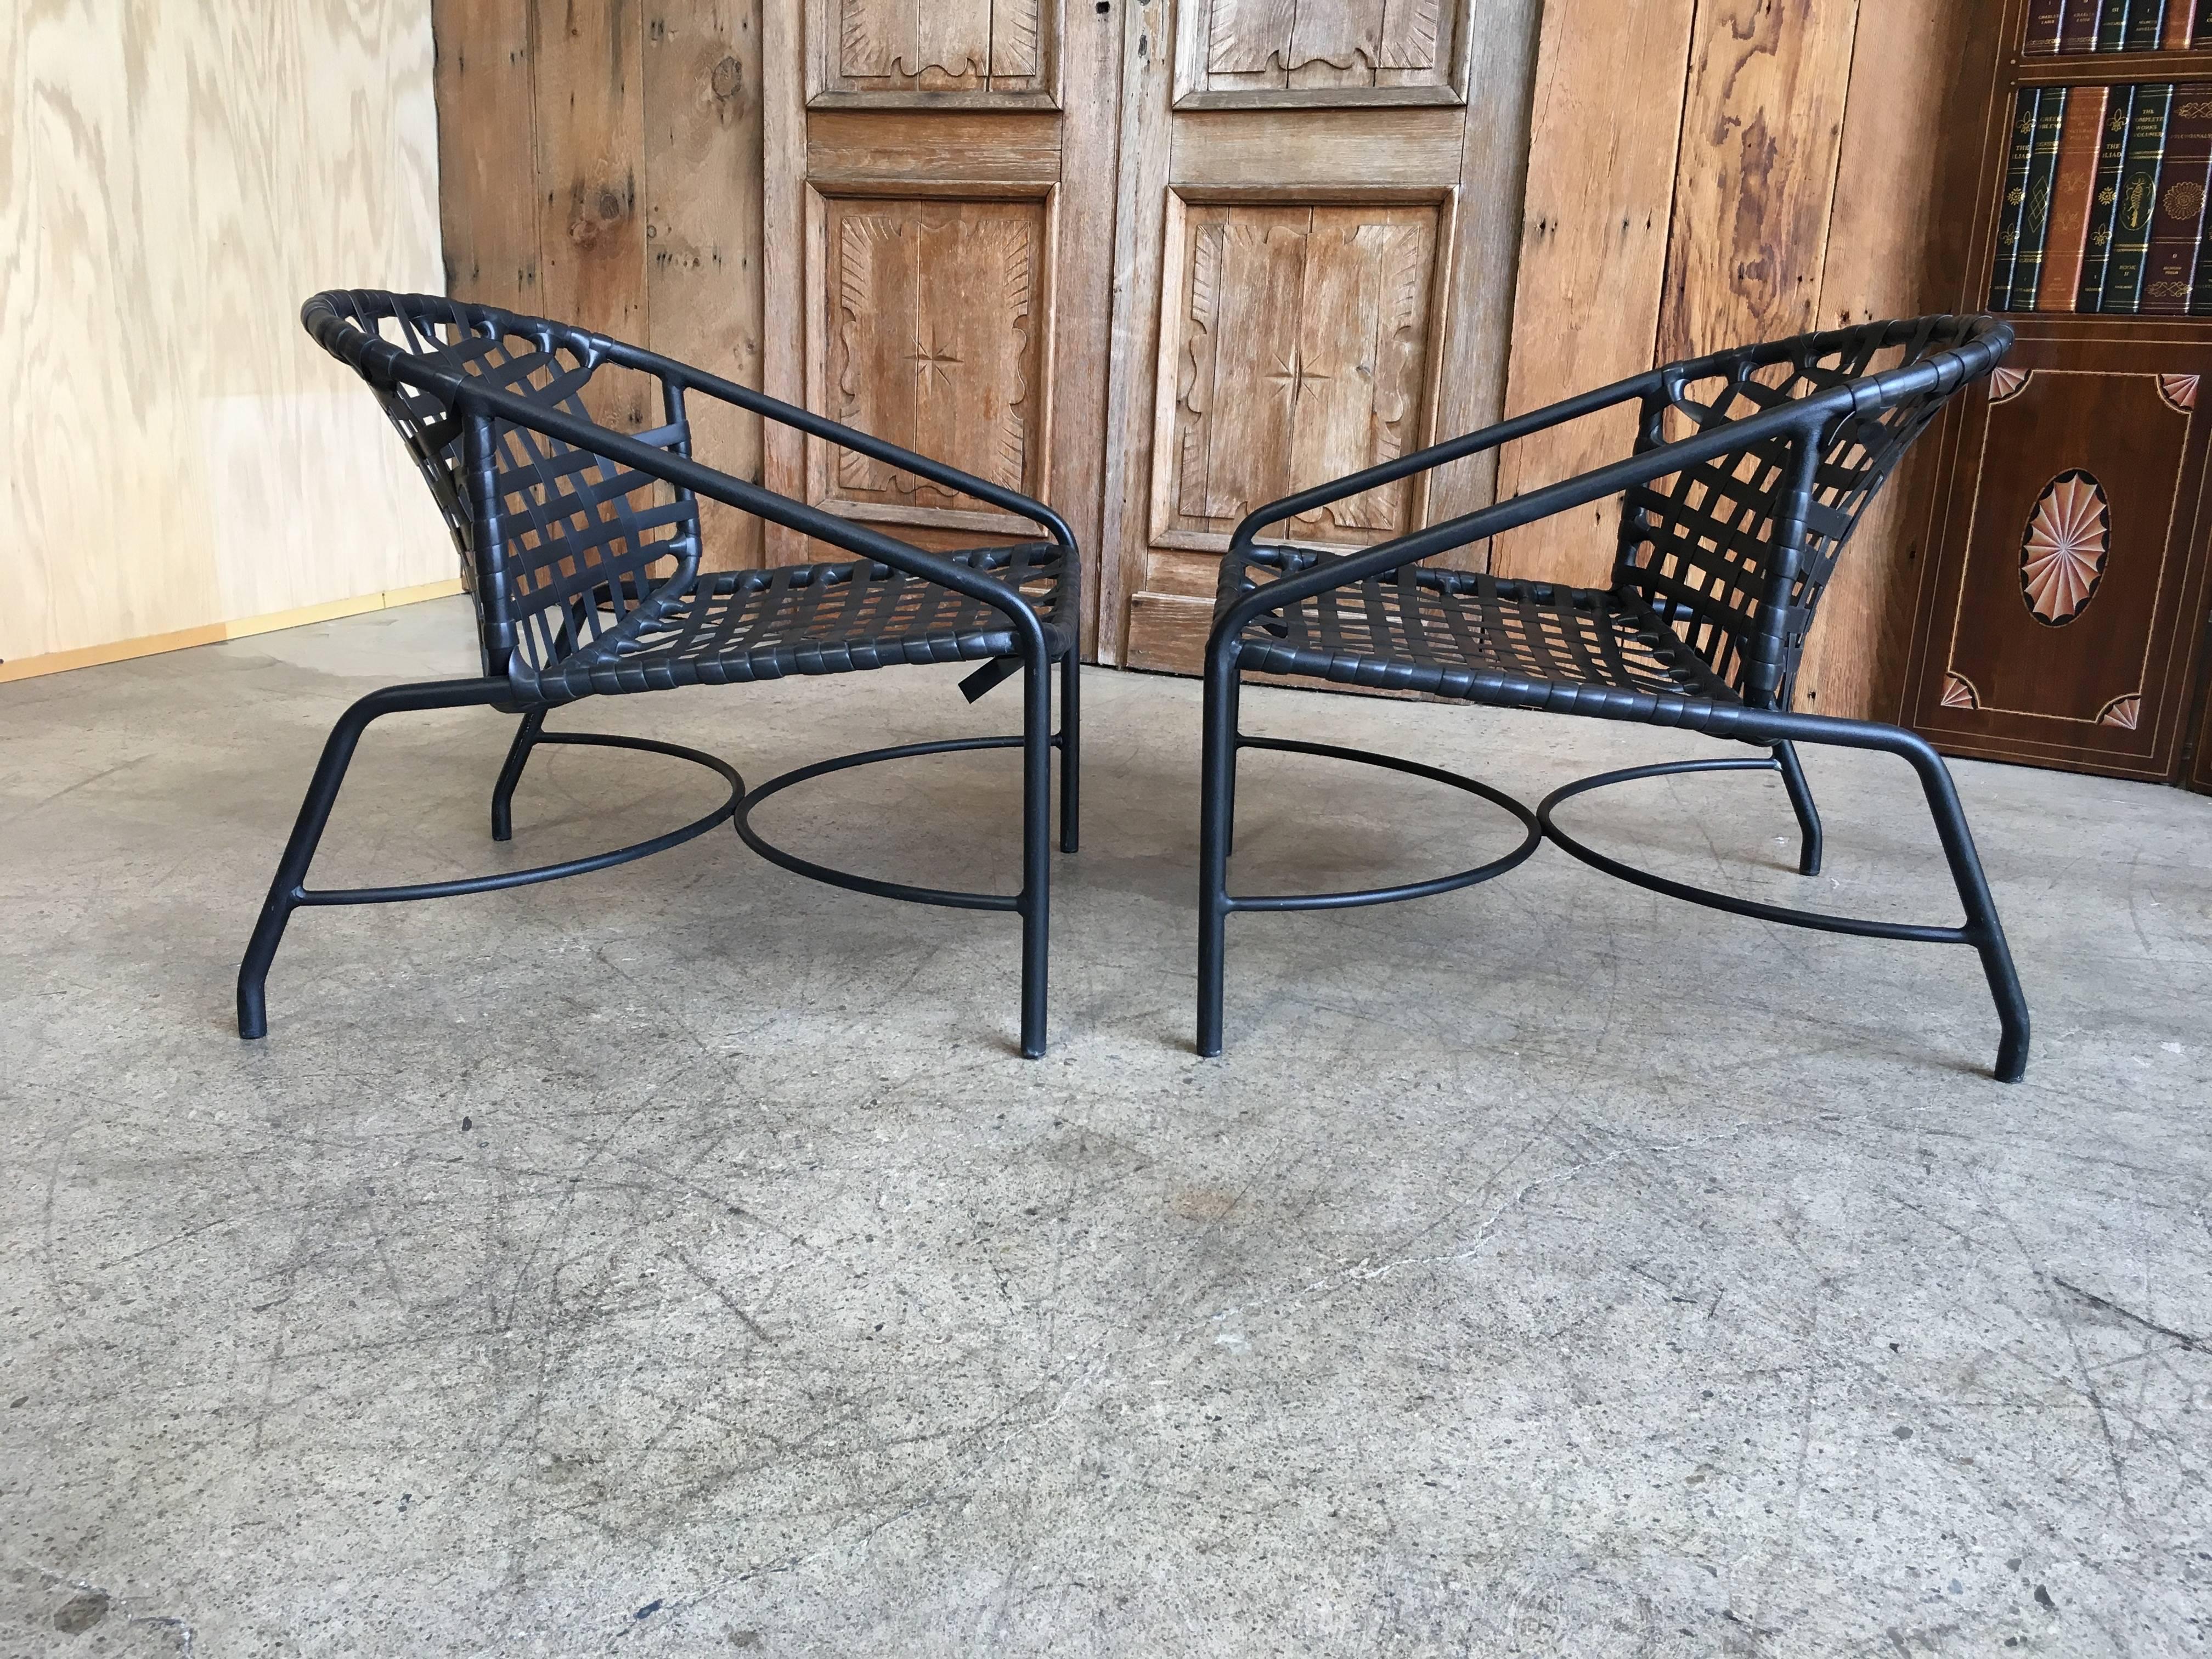 Vintage Kantan patio chairs by Brown Jordon the seat is 13.5 high.